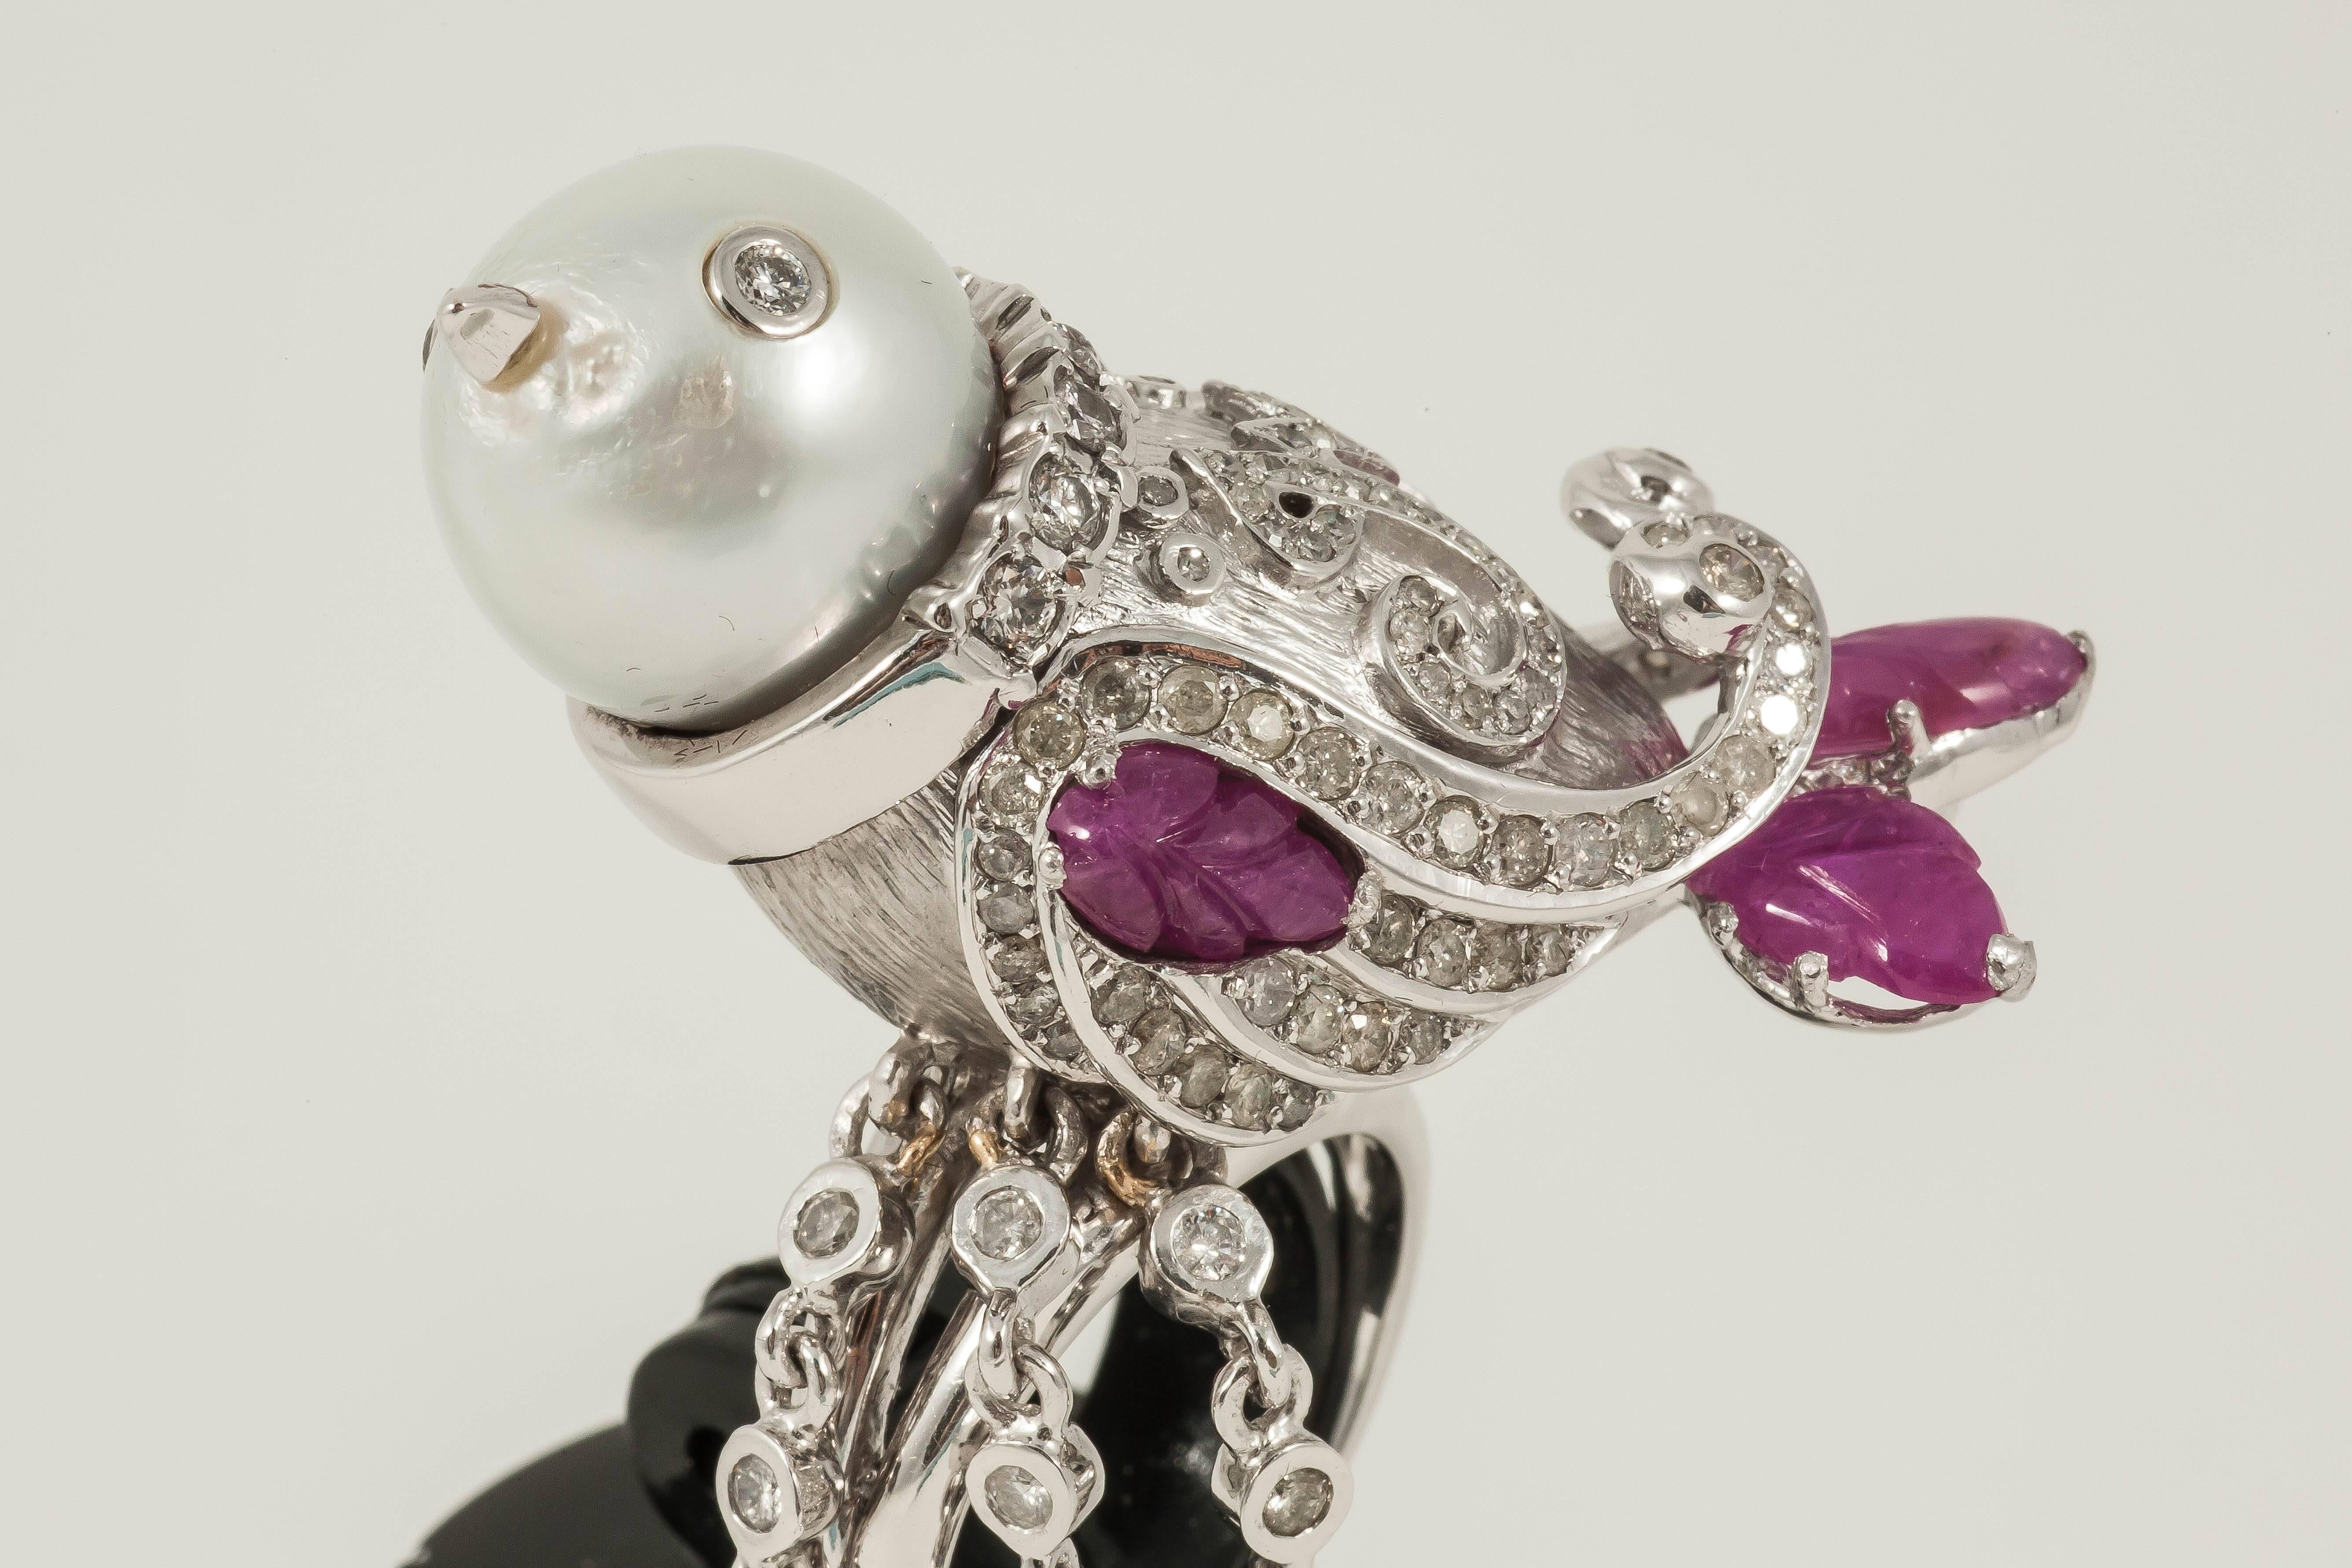 Pearl bird encased with Diamonds & carved Ruby leaves. Hanging off this ring are Arabic letters of love & peace

18K White Gold: 30.1gms
Diamond: 4.8cts
Ruby leaves: 2.6cts
South-Sea Pearl